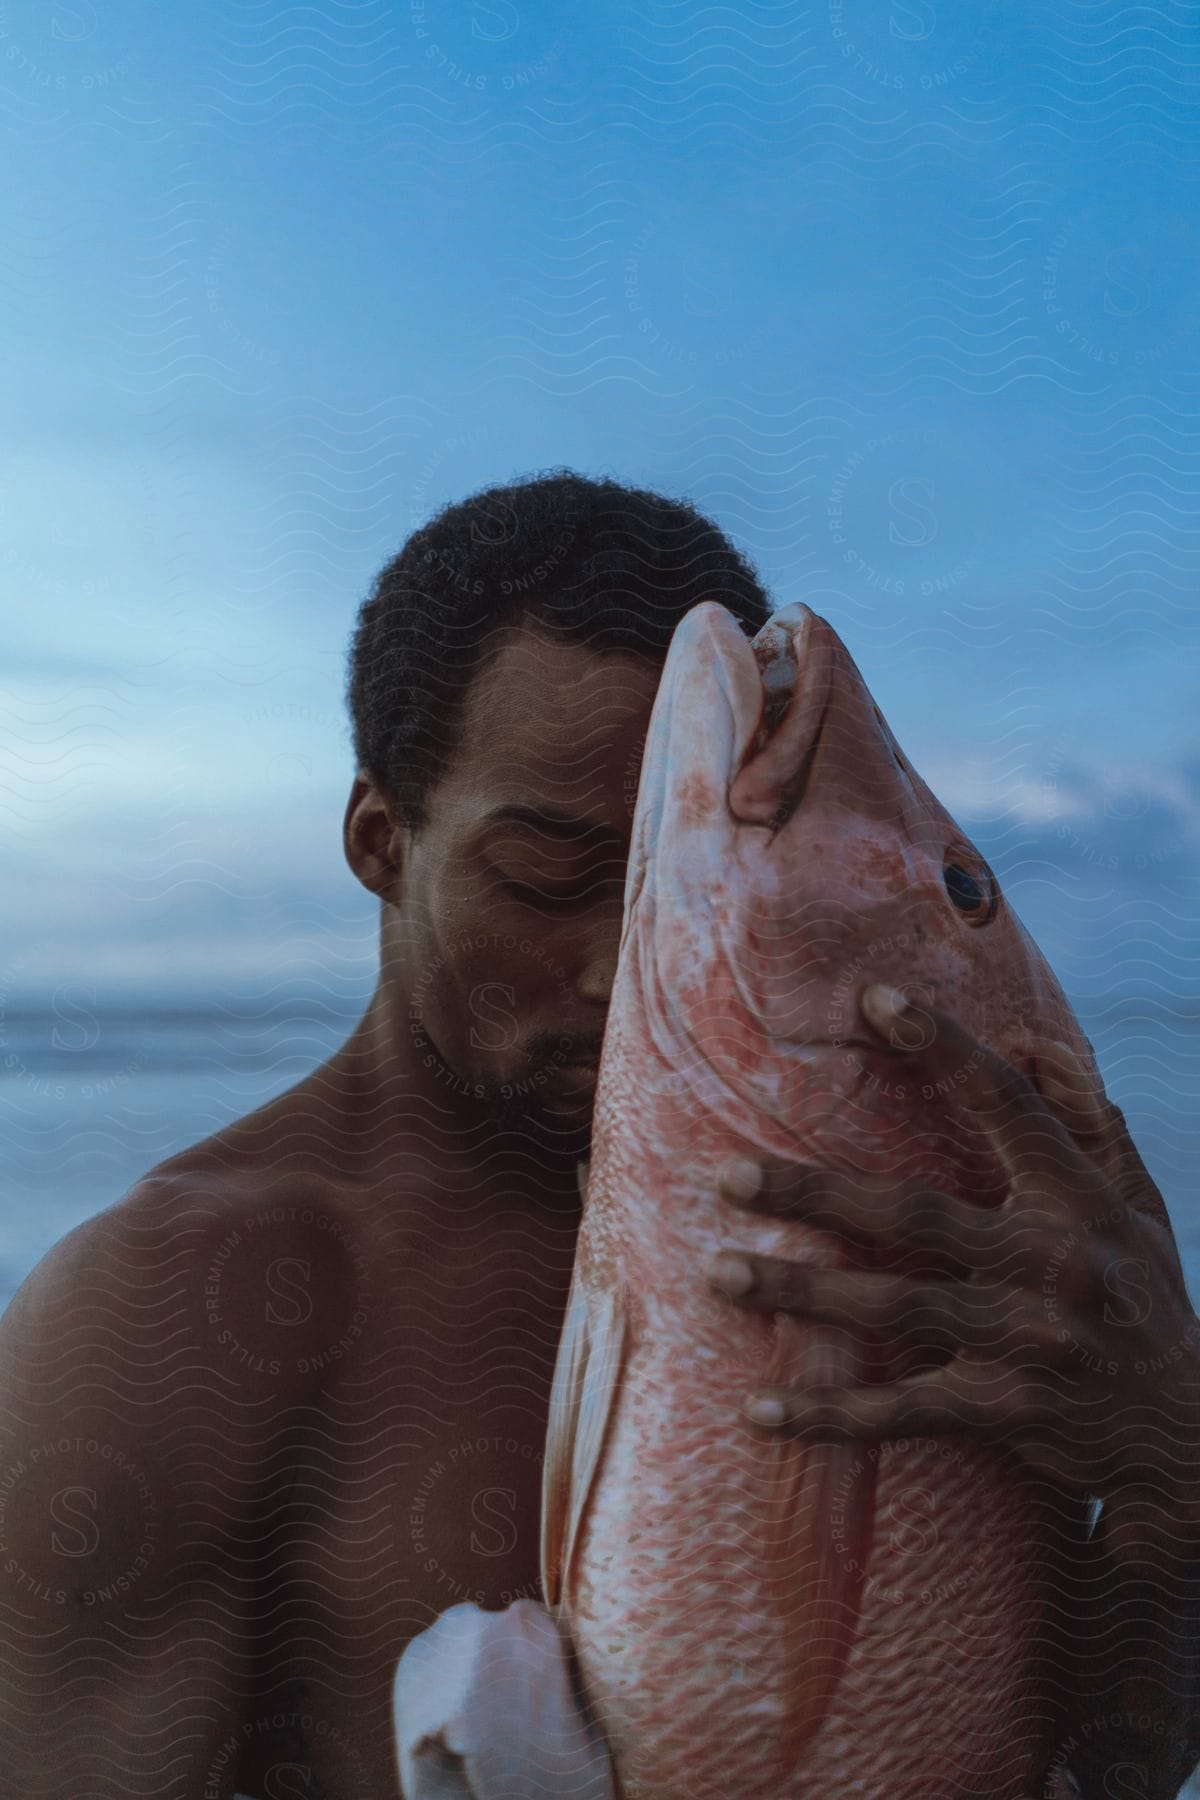 A Man Stands With A Large Fish Obscuring Half Of His Face